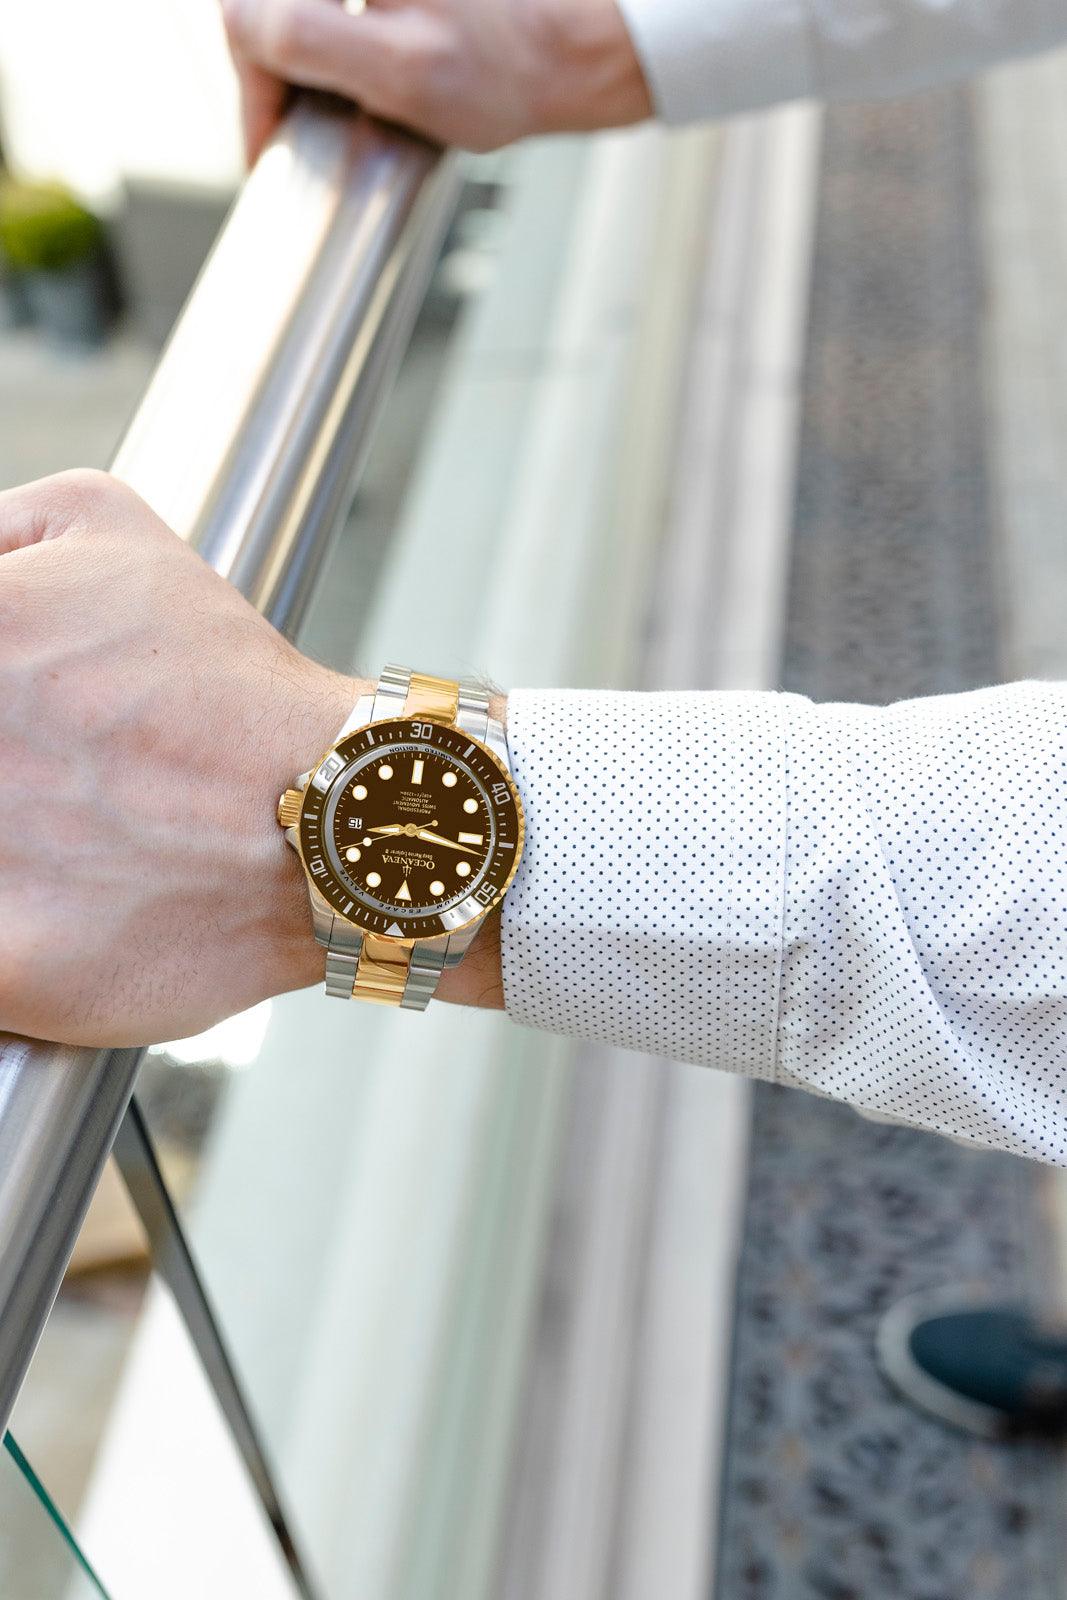 Oceaneva 1250M Dive Watch Brown And Gold On Wrist